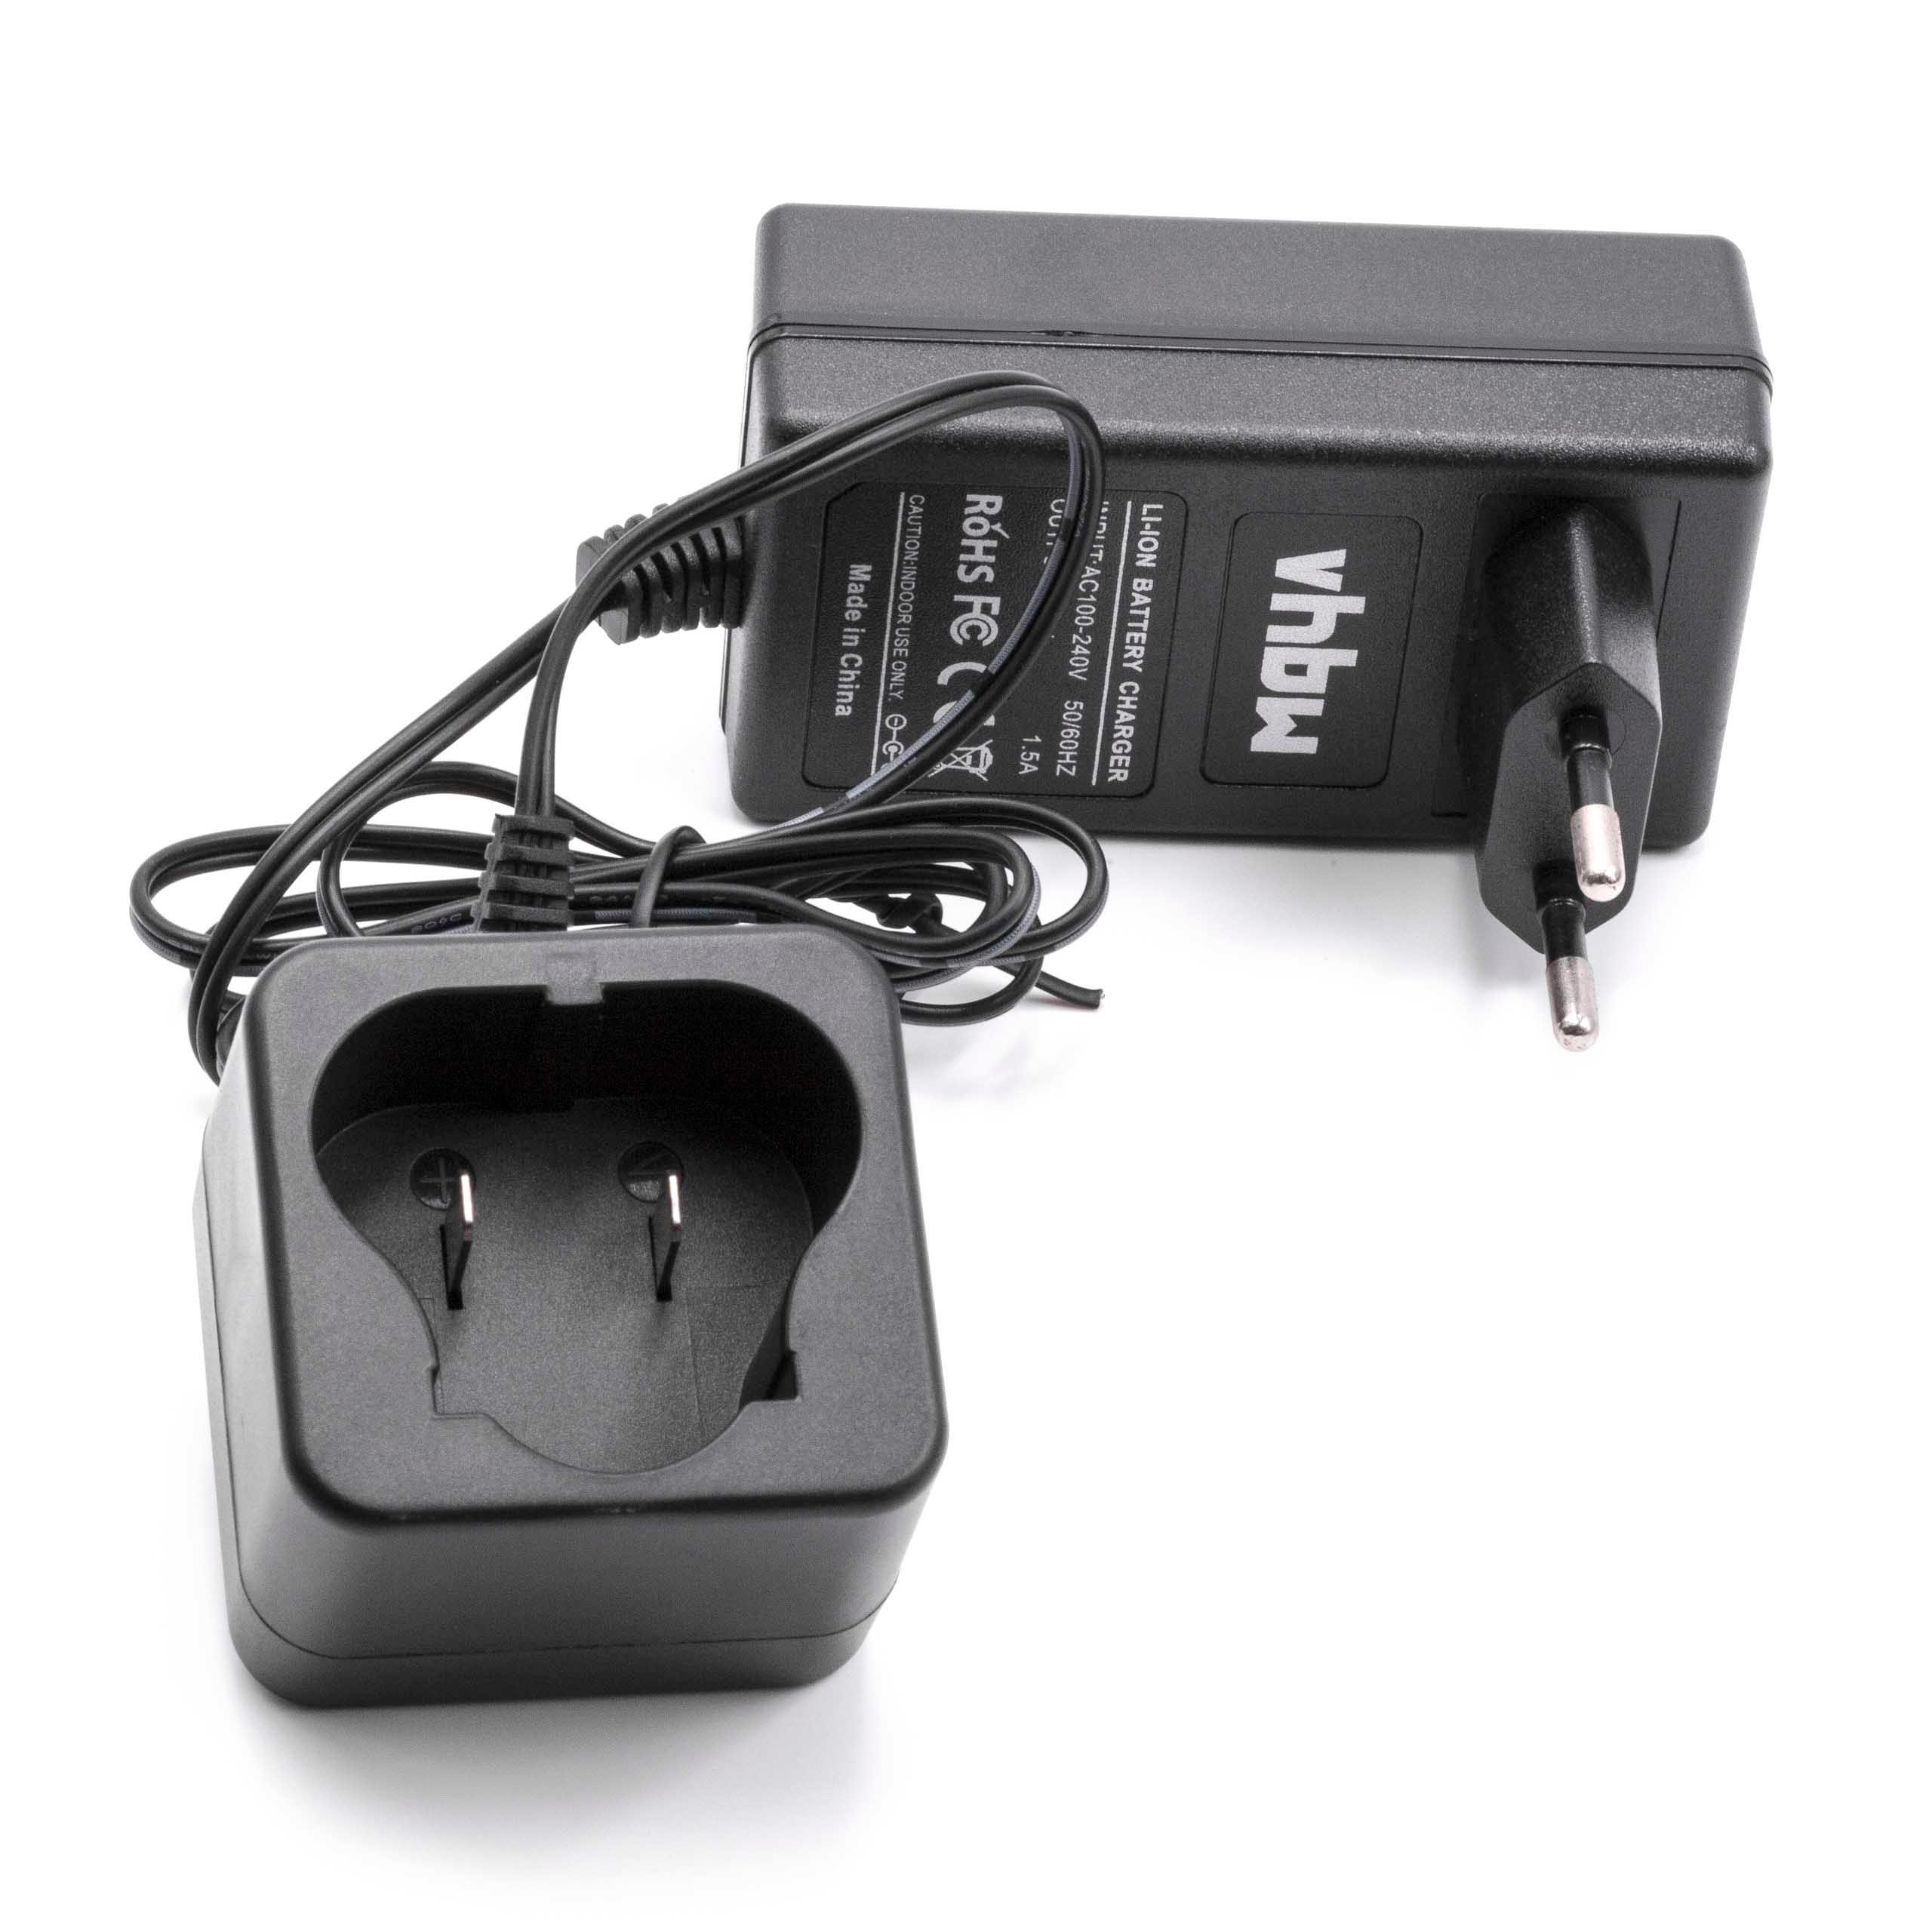 Charger replaces Black & Decker LCS12 for Black & DeckerPower Tool Batteries etc. Li-Ion 12 V